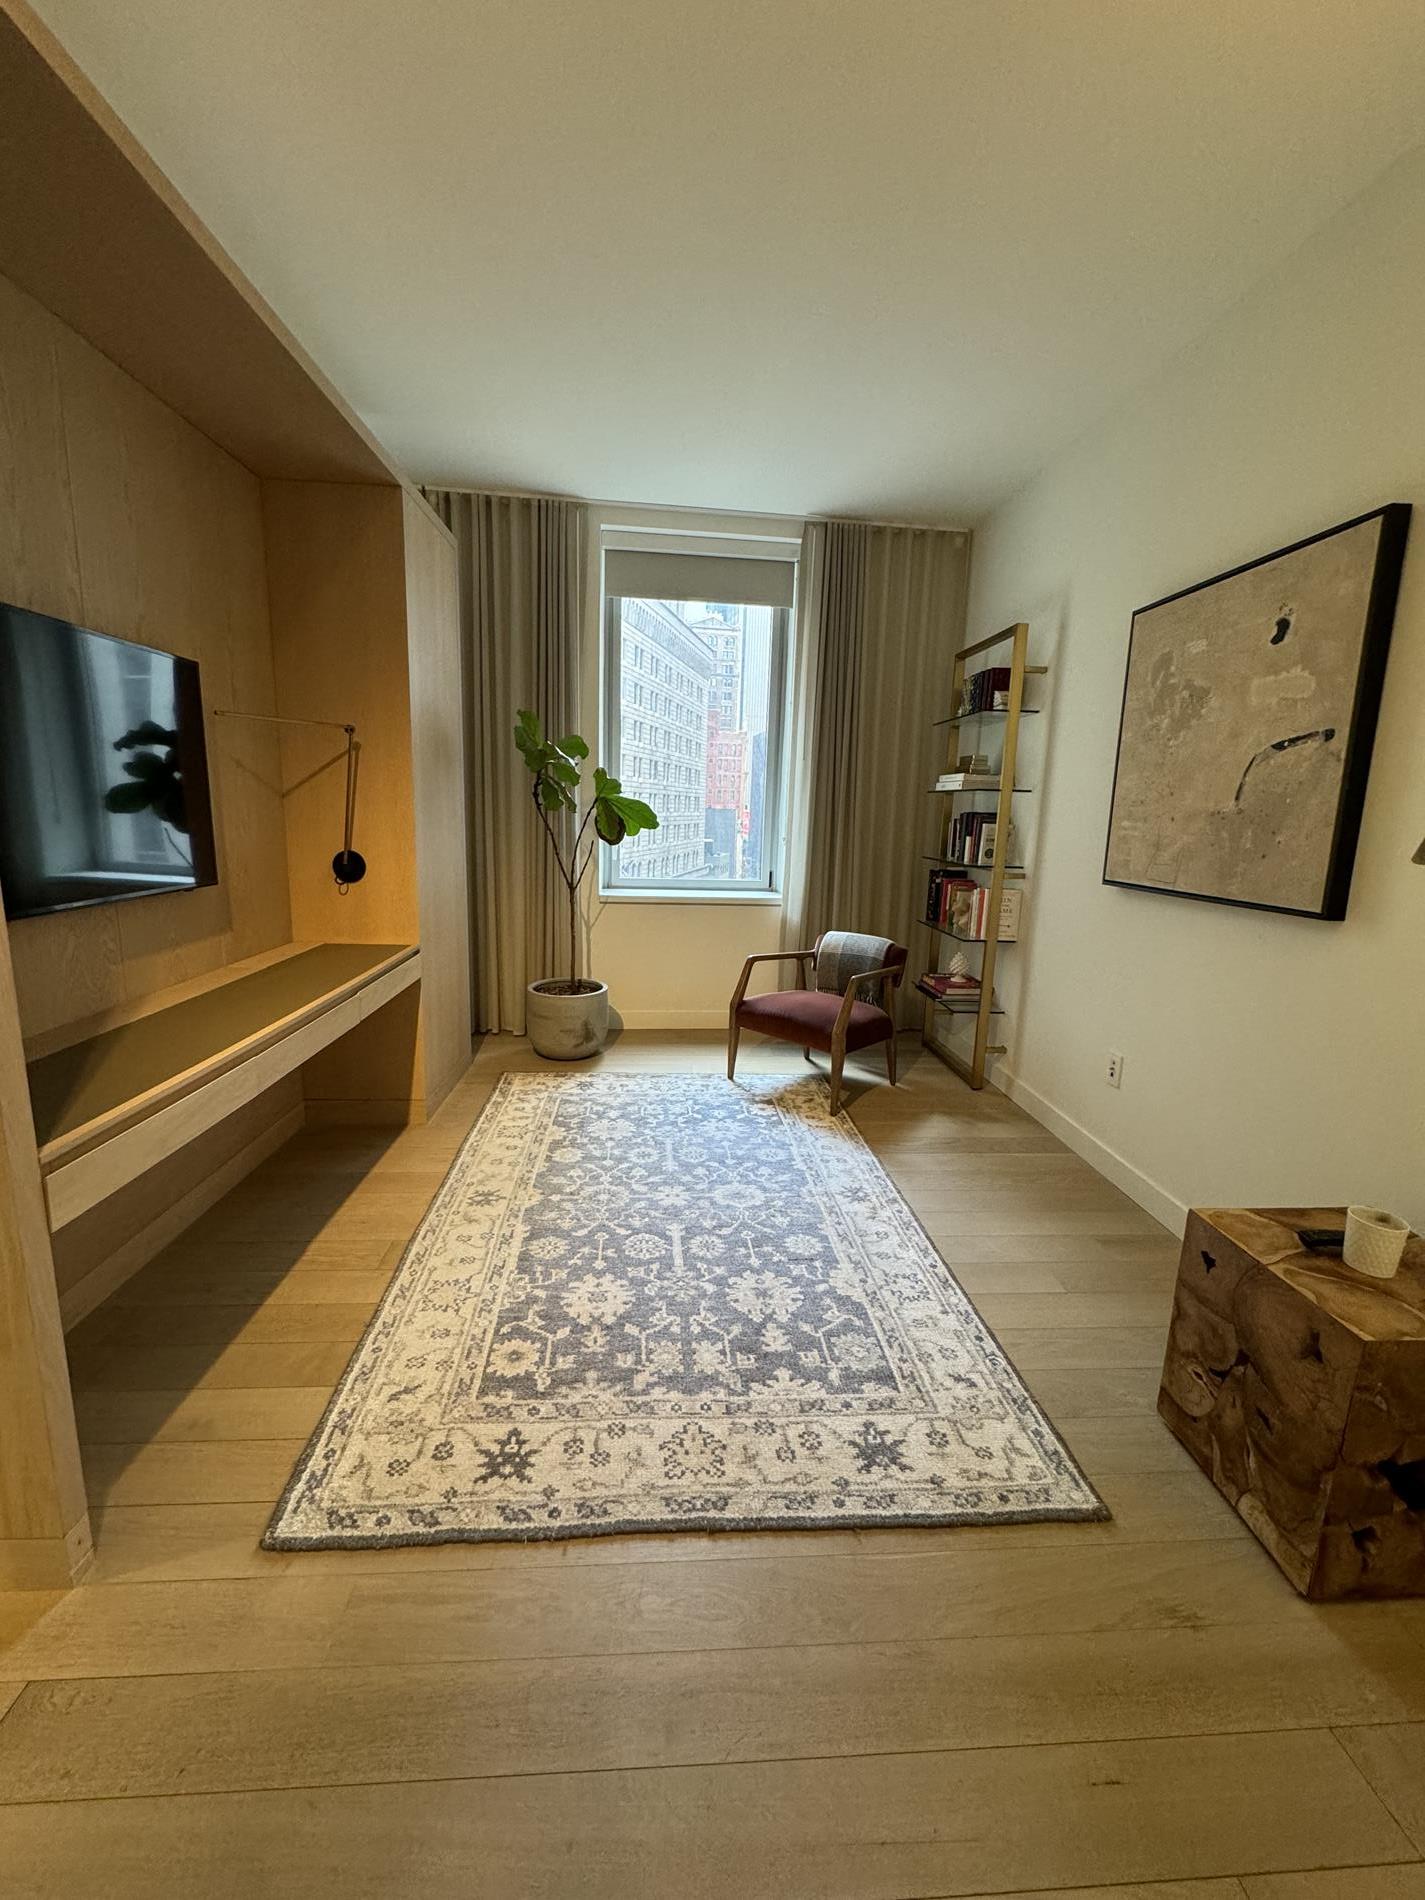 84 William Street 807, Financial District, Downtown, NYC - 1 Bedrooms  
1 Bathrooms  
3 Rooms - 